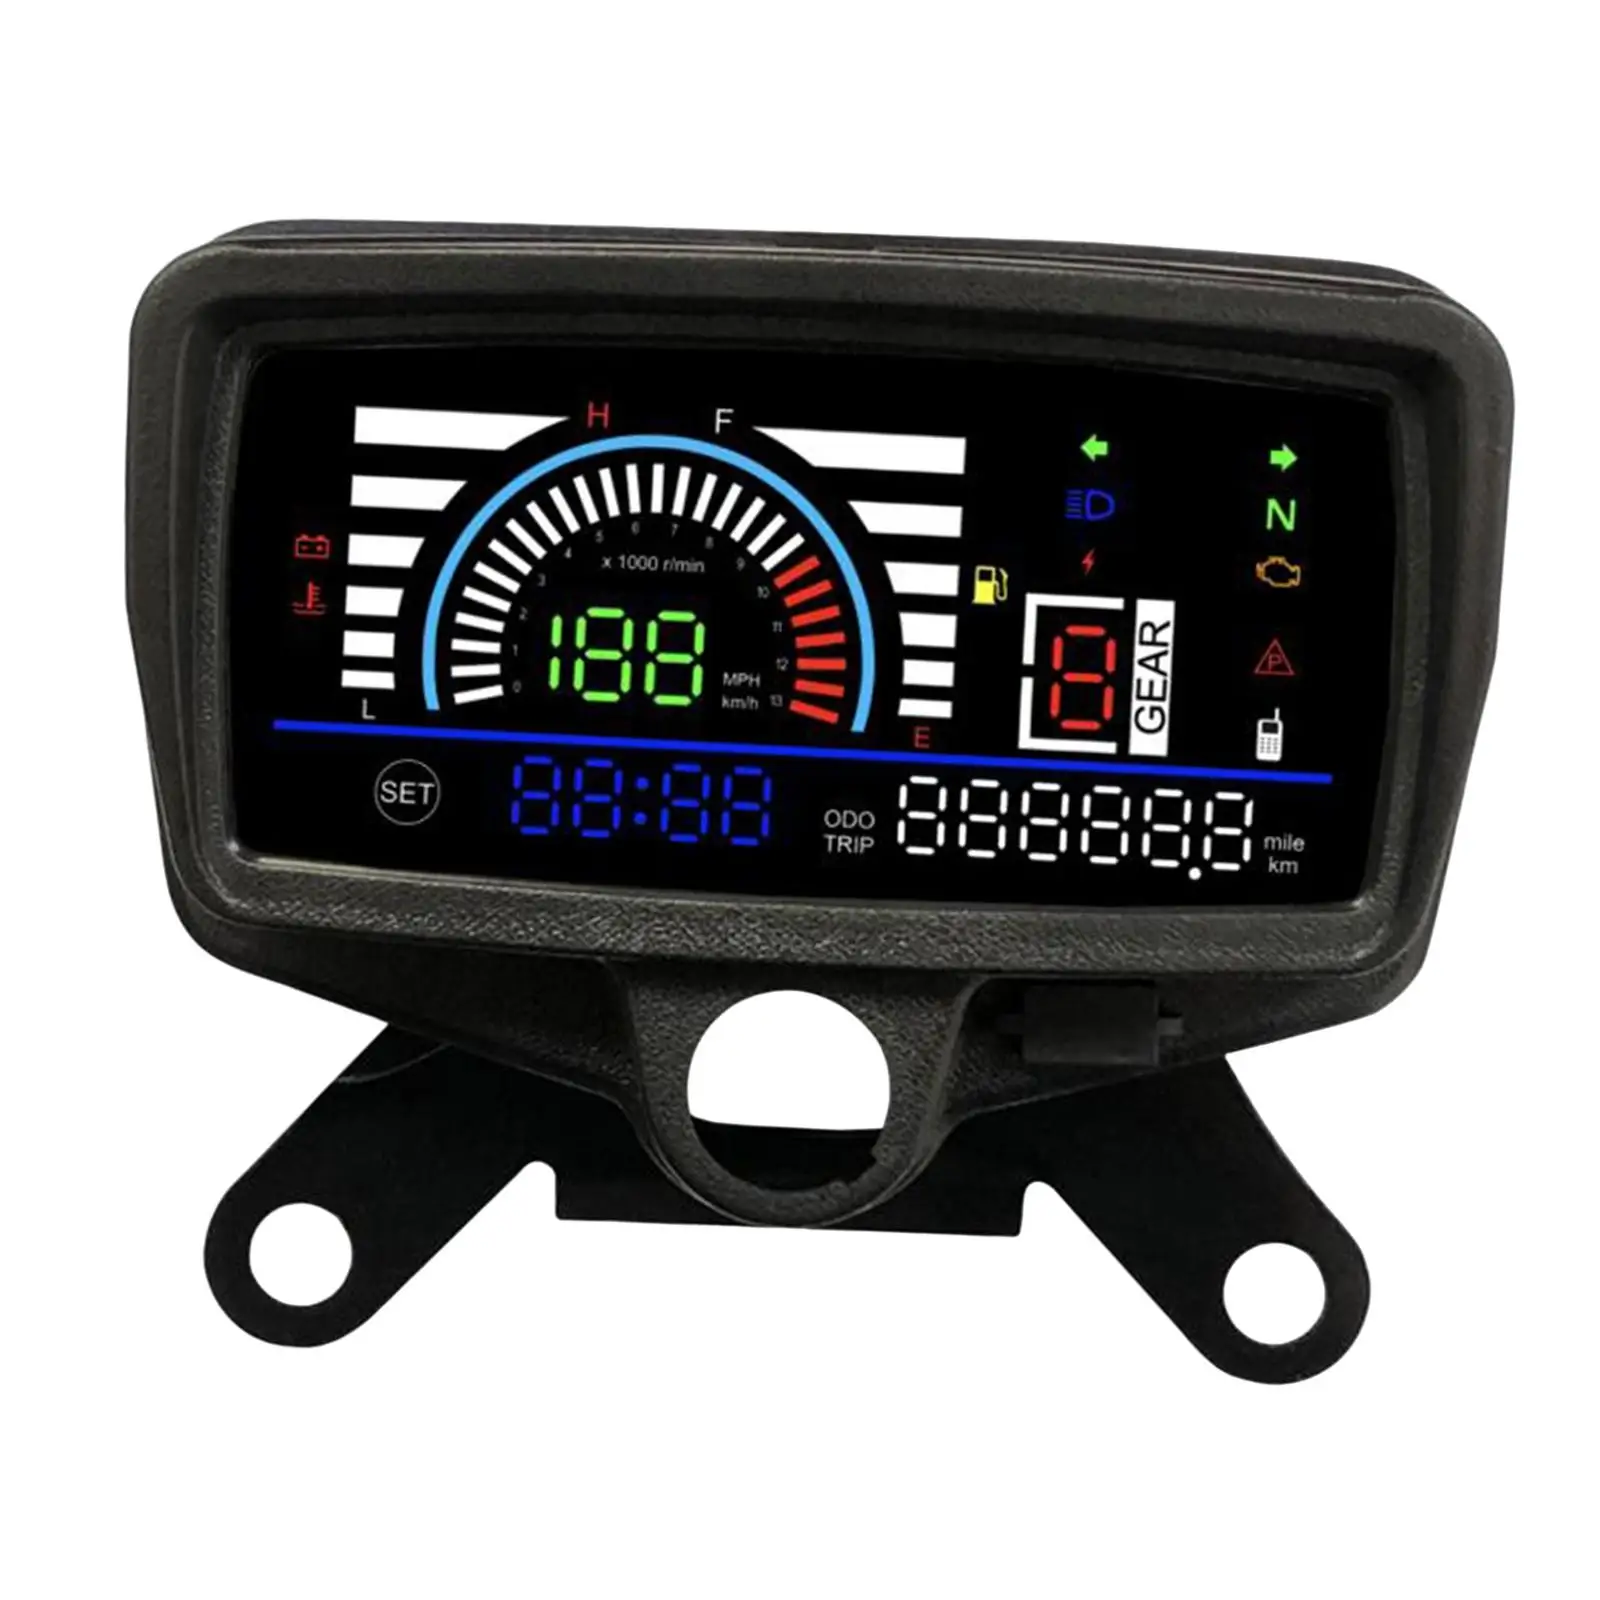 LCD Digital Speedometer Fuel Indicator 12V for CG125-150 Replace Parts